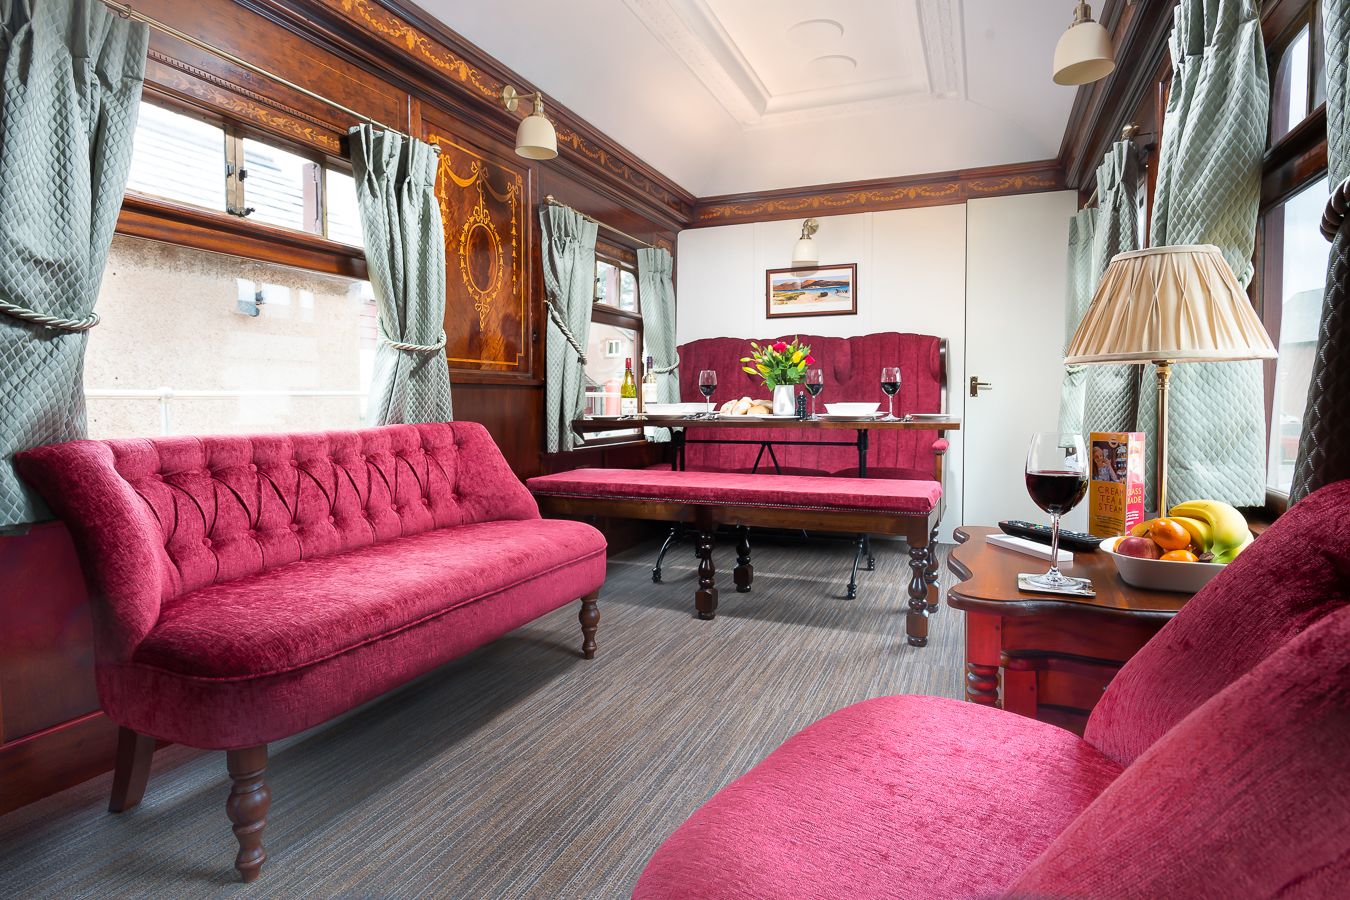 Pullman Camping Coaches at the Ravenglass and Eskdale Railway